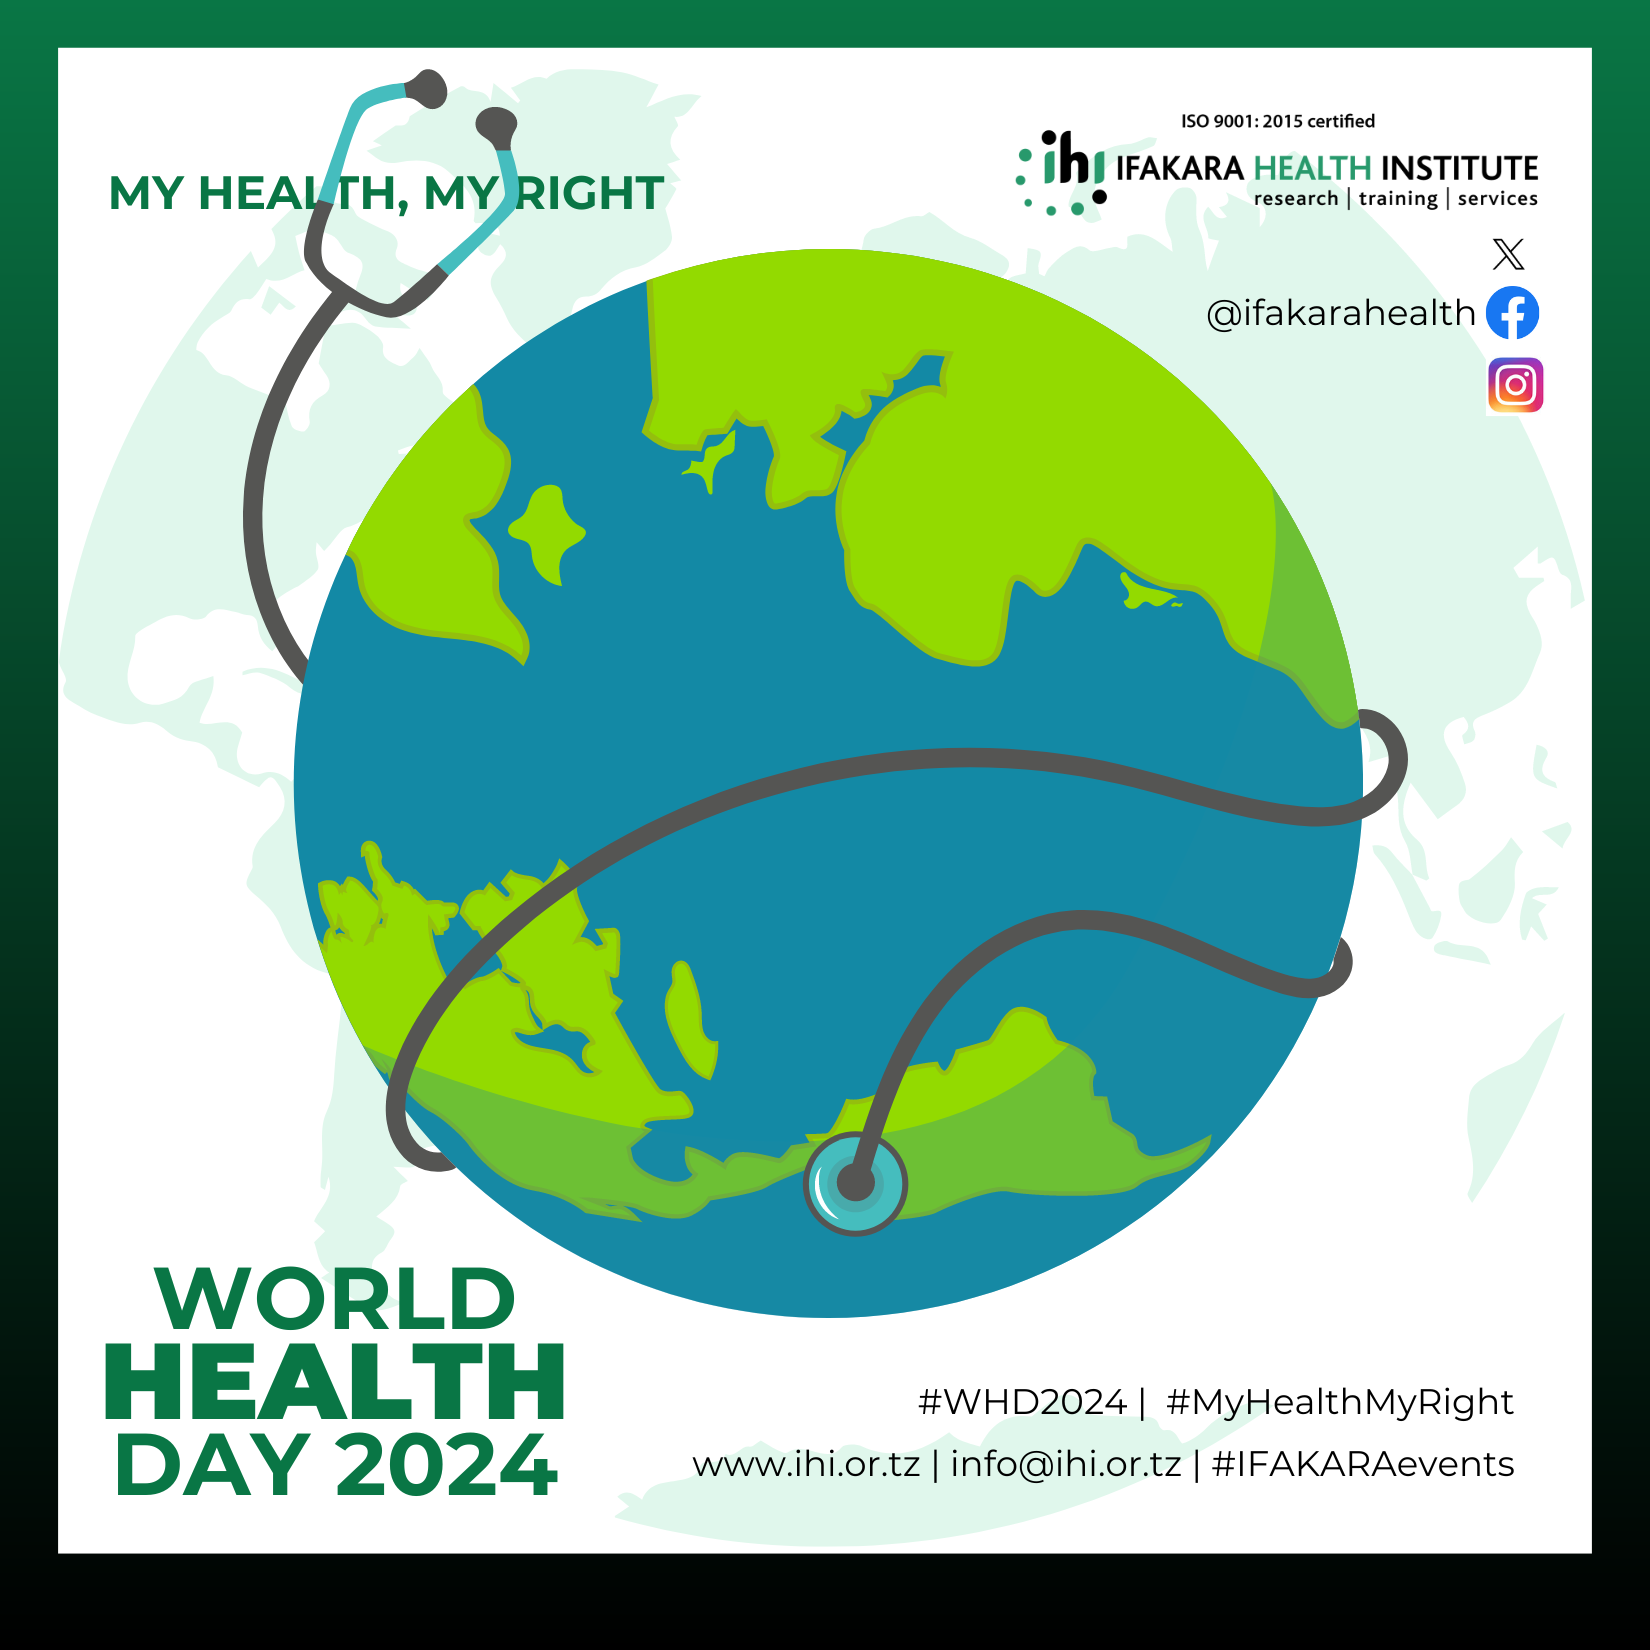 WORLD HEALTH DAY 2024: Our commitment to health as a right for all